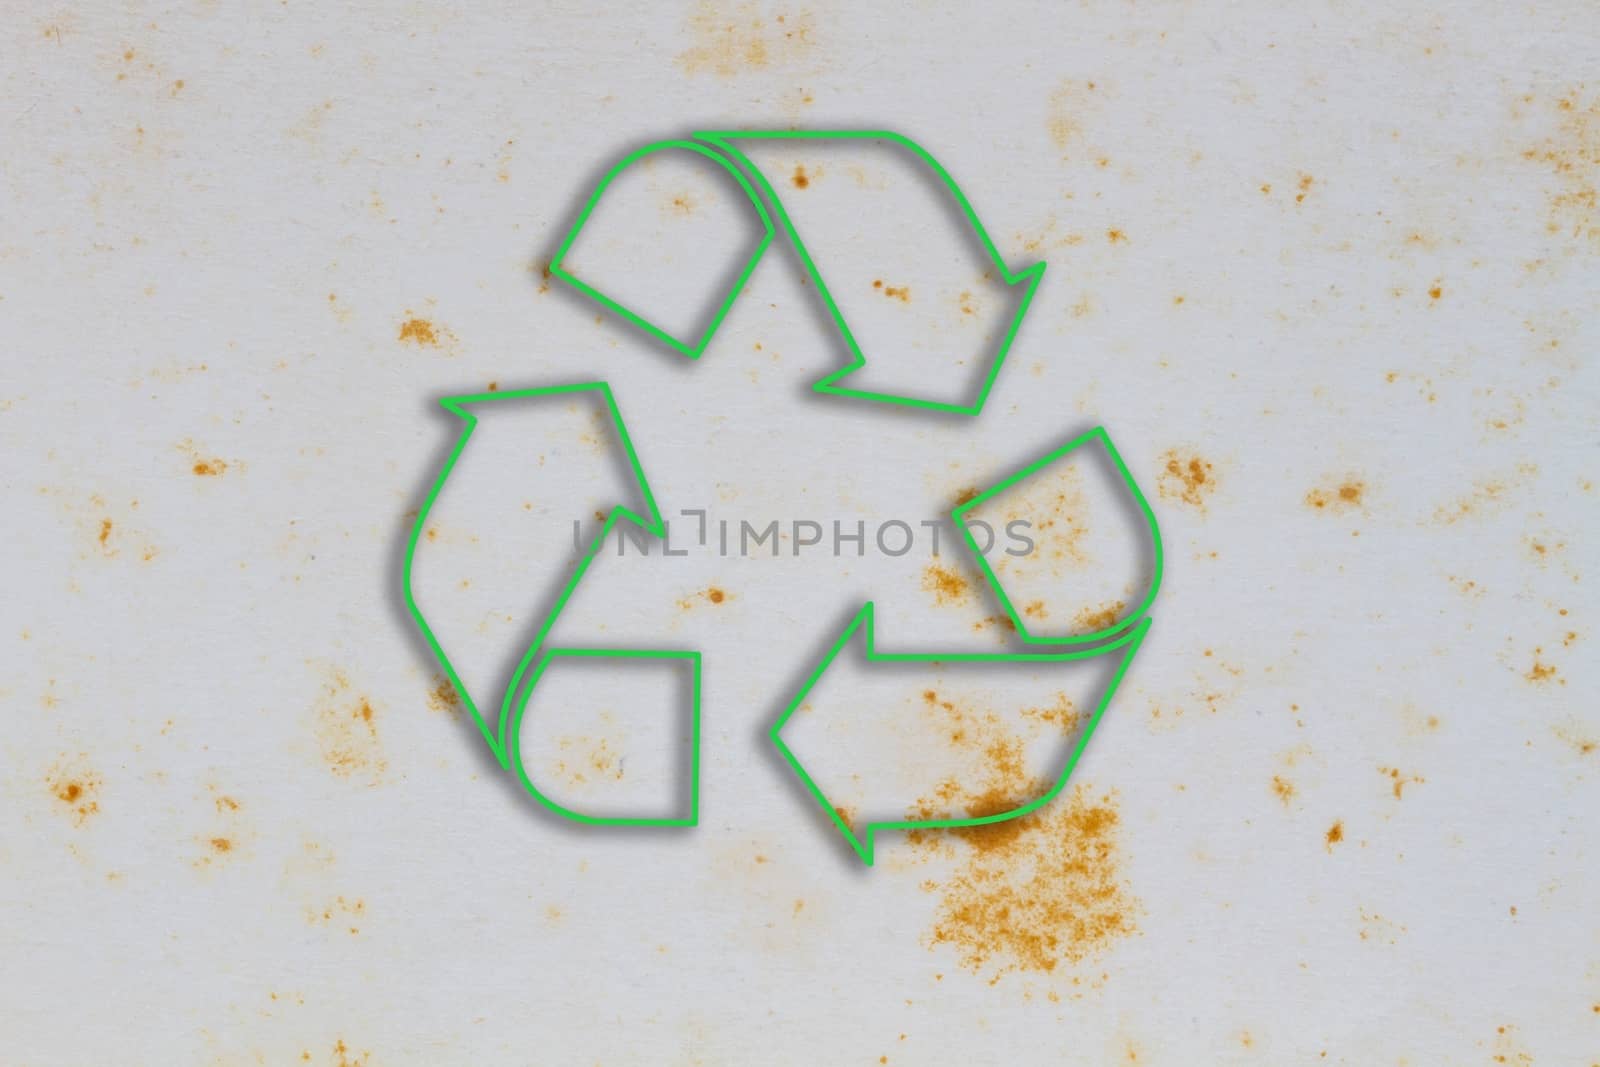 Old vintage paper with coffee stain in the middle, with green sign of recycle